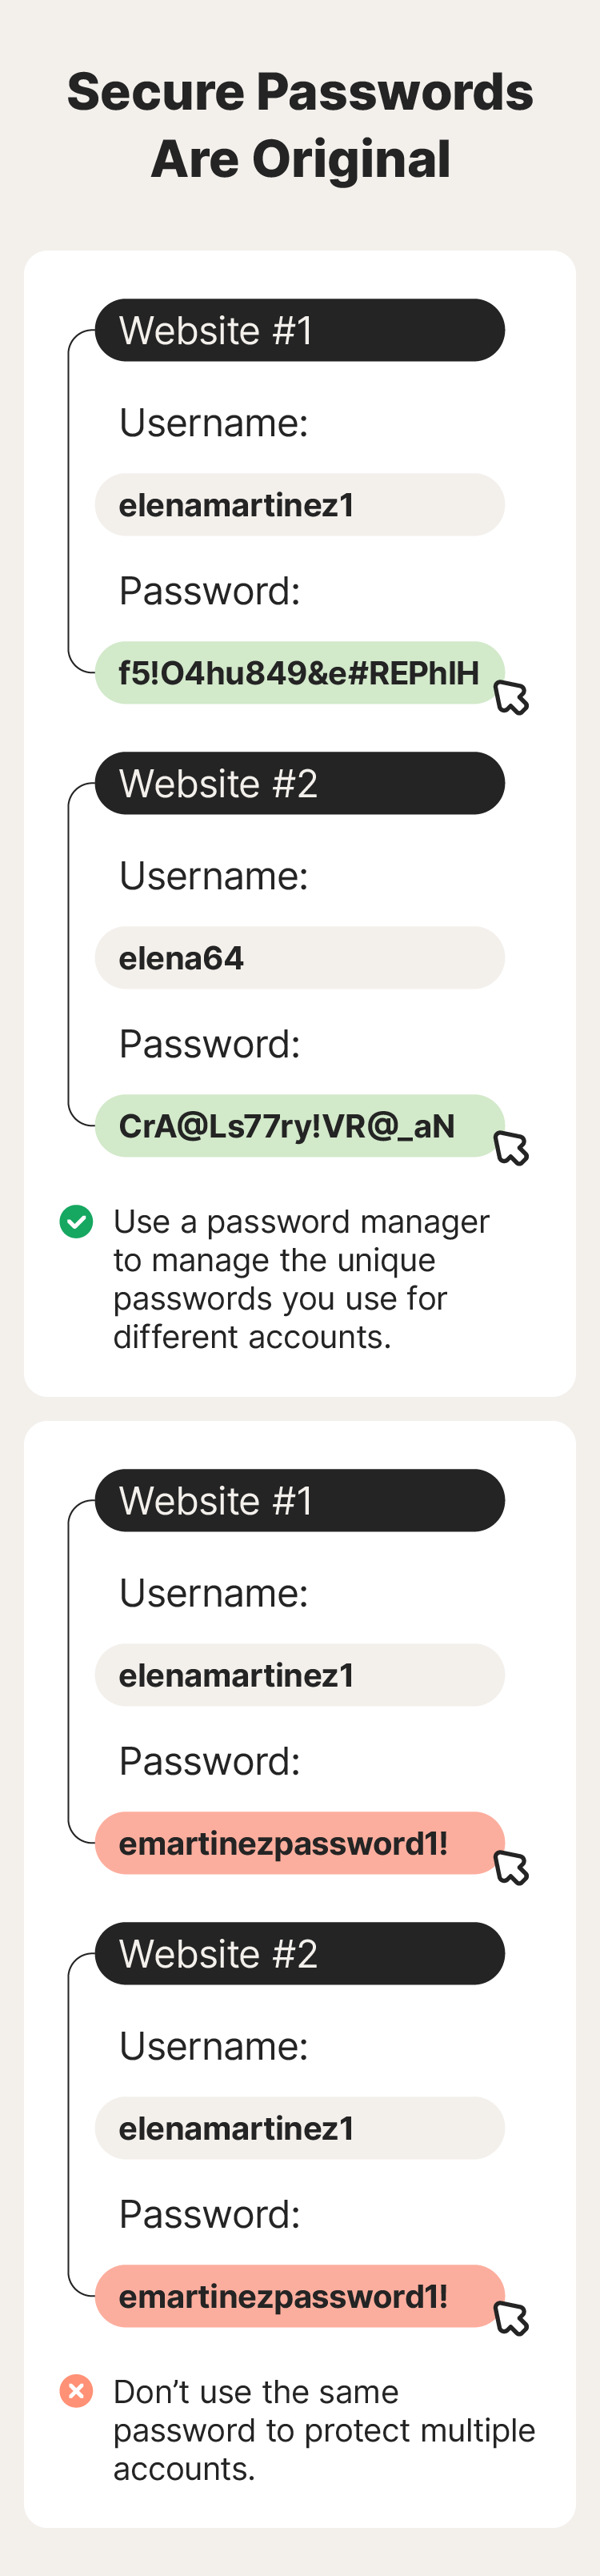 An example showing how you can use a password manager to protect and remember your unique and secure passwords.